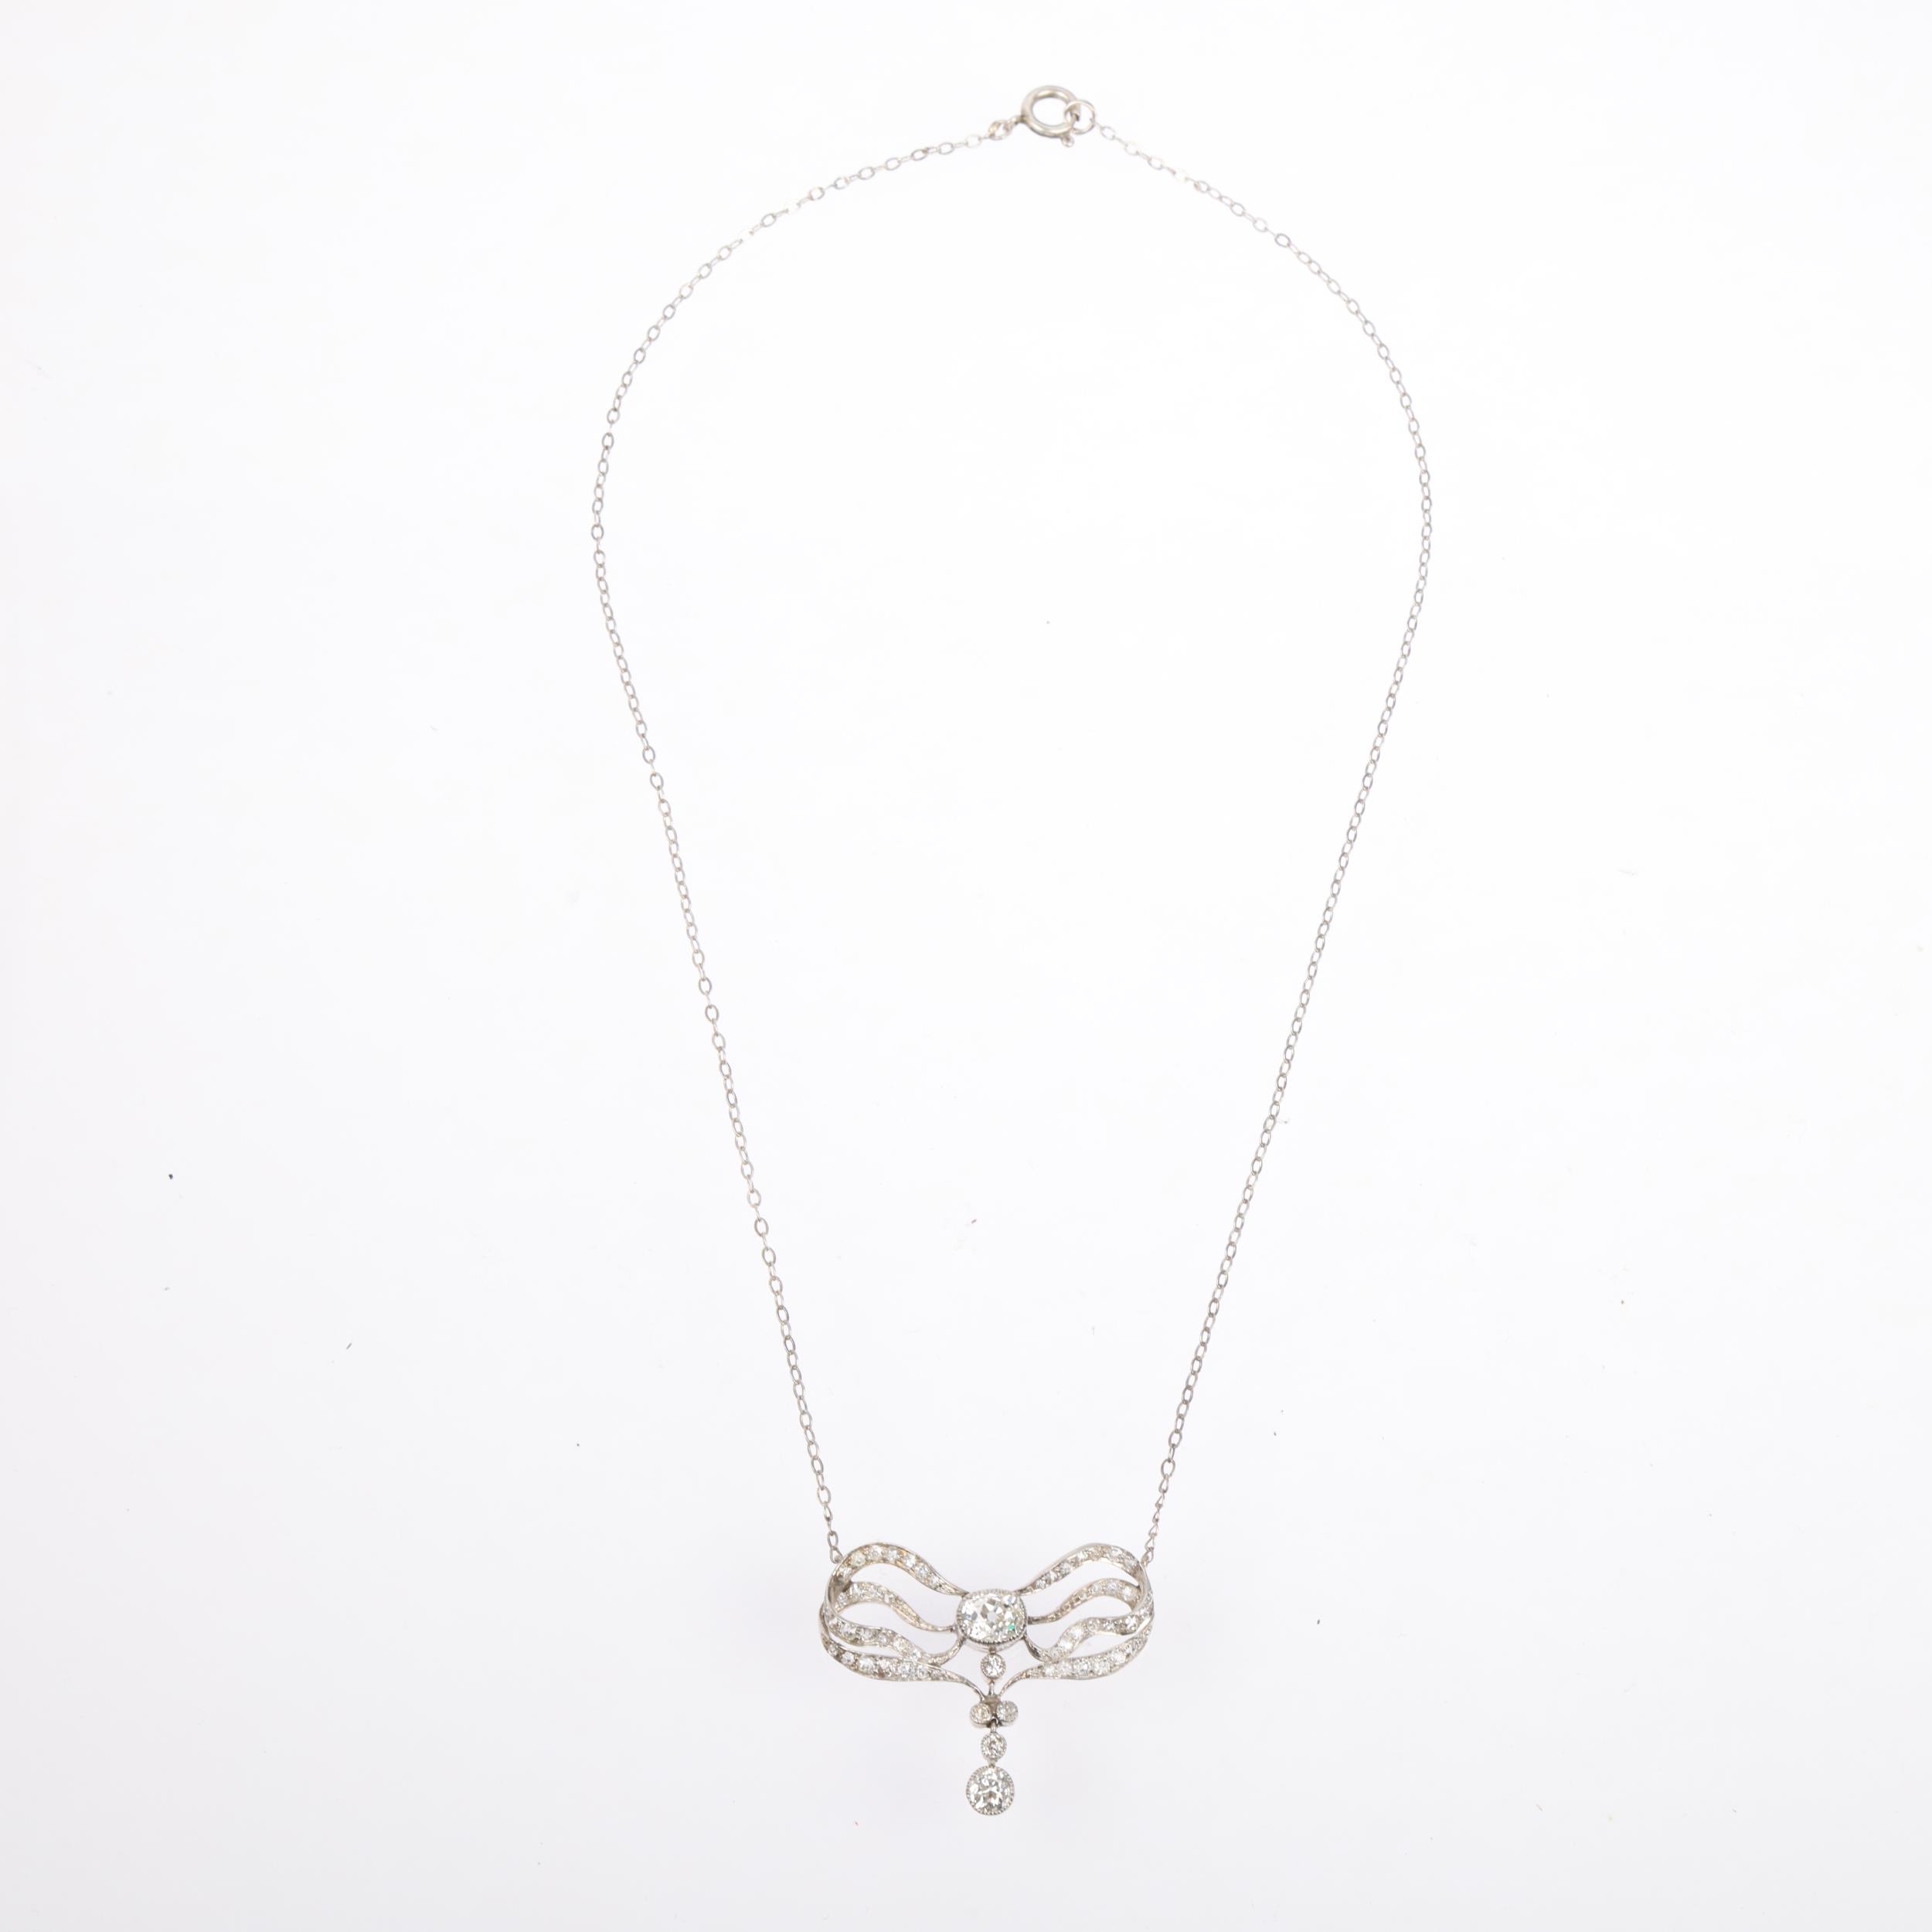 An Art Nouveau French diamond ribbon bow pendant necklace, circa 1910, set with old and eight-cut - Image 2 of 4